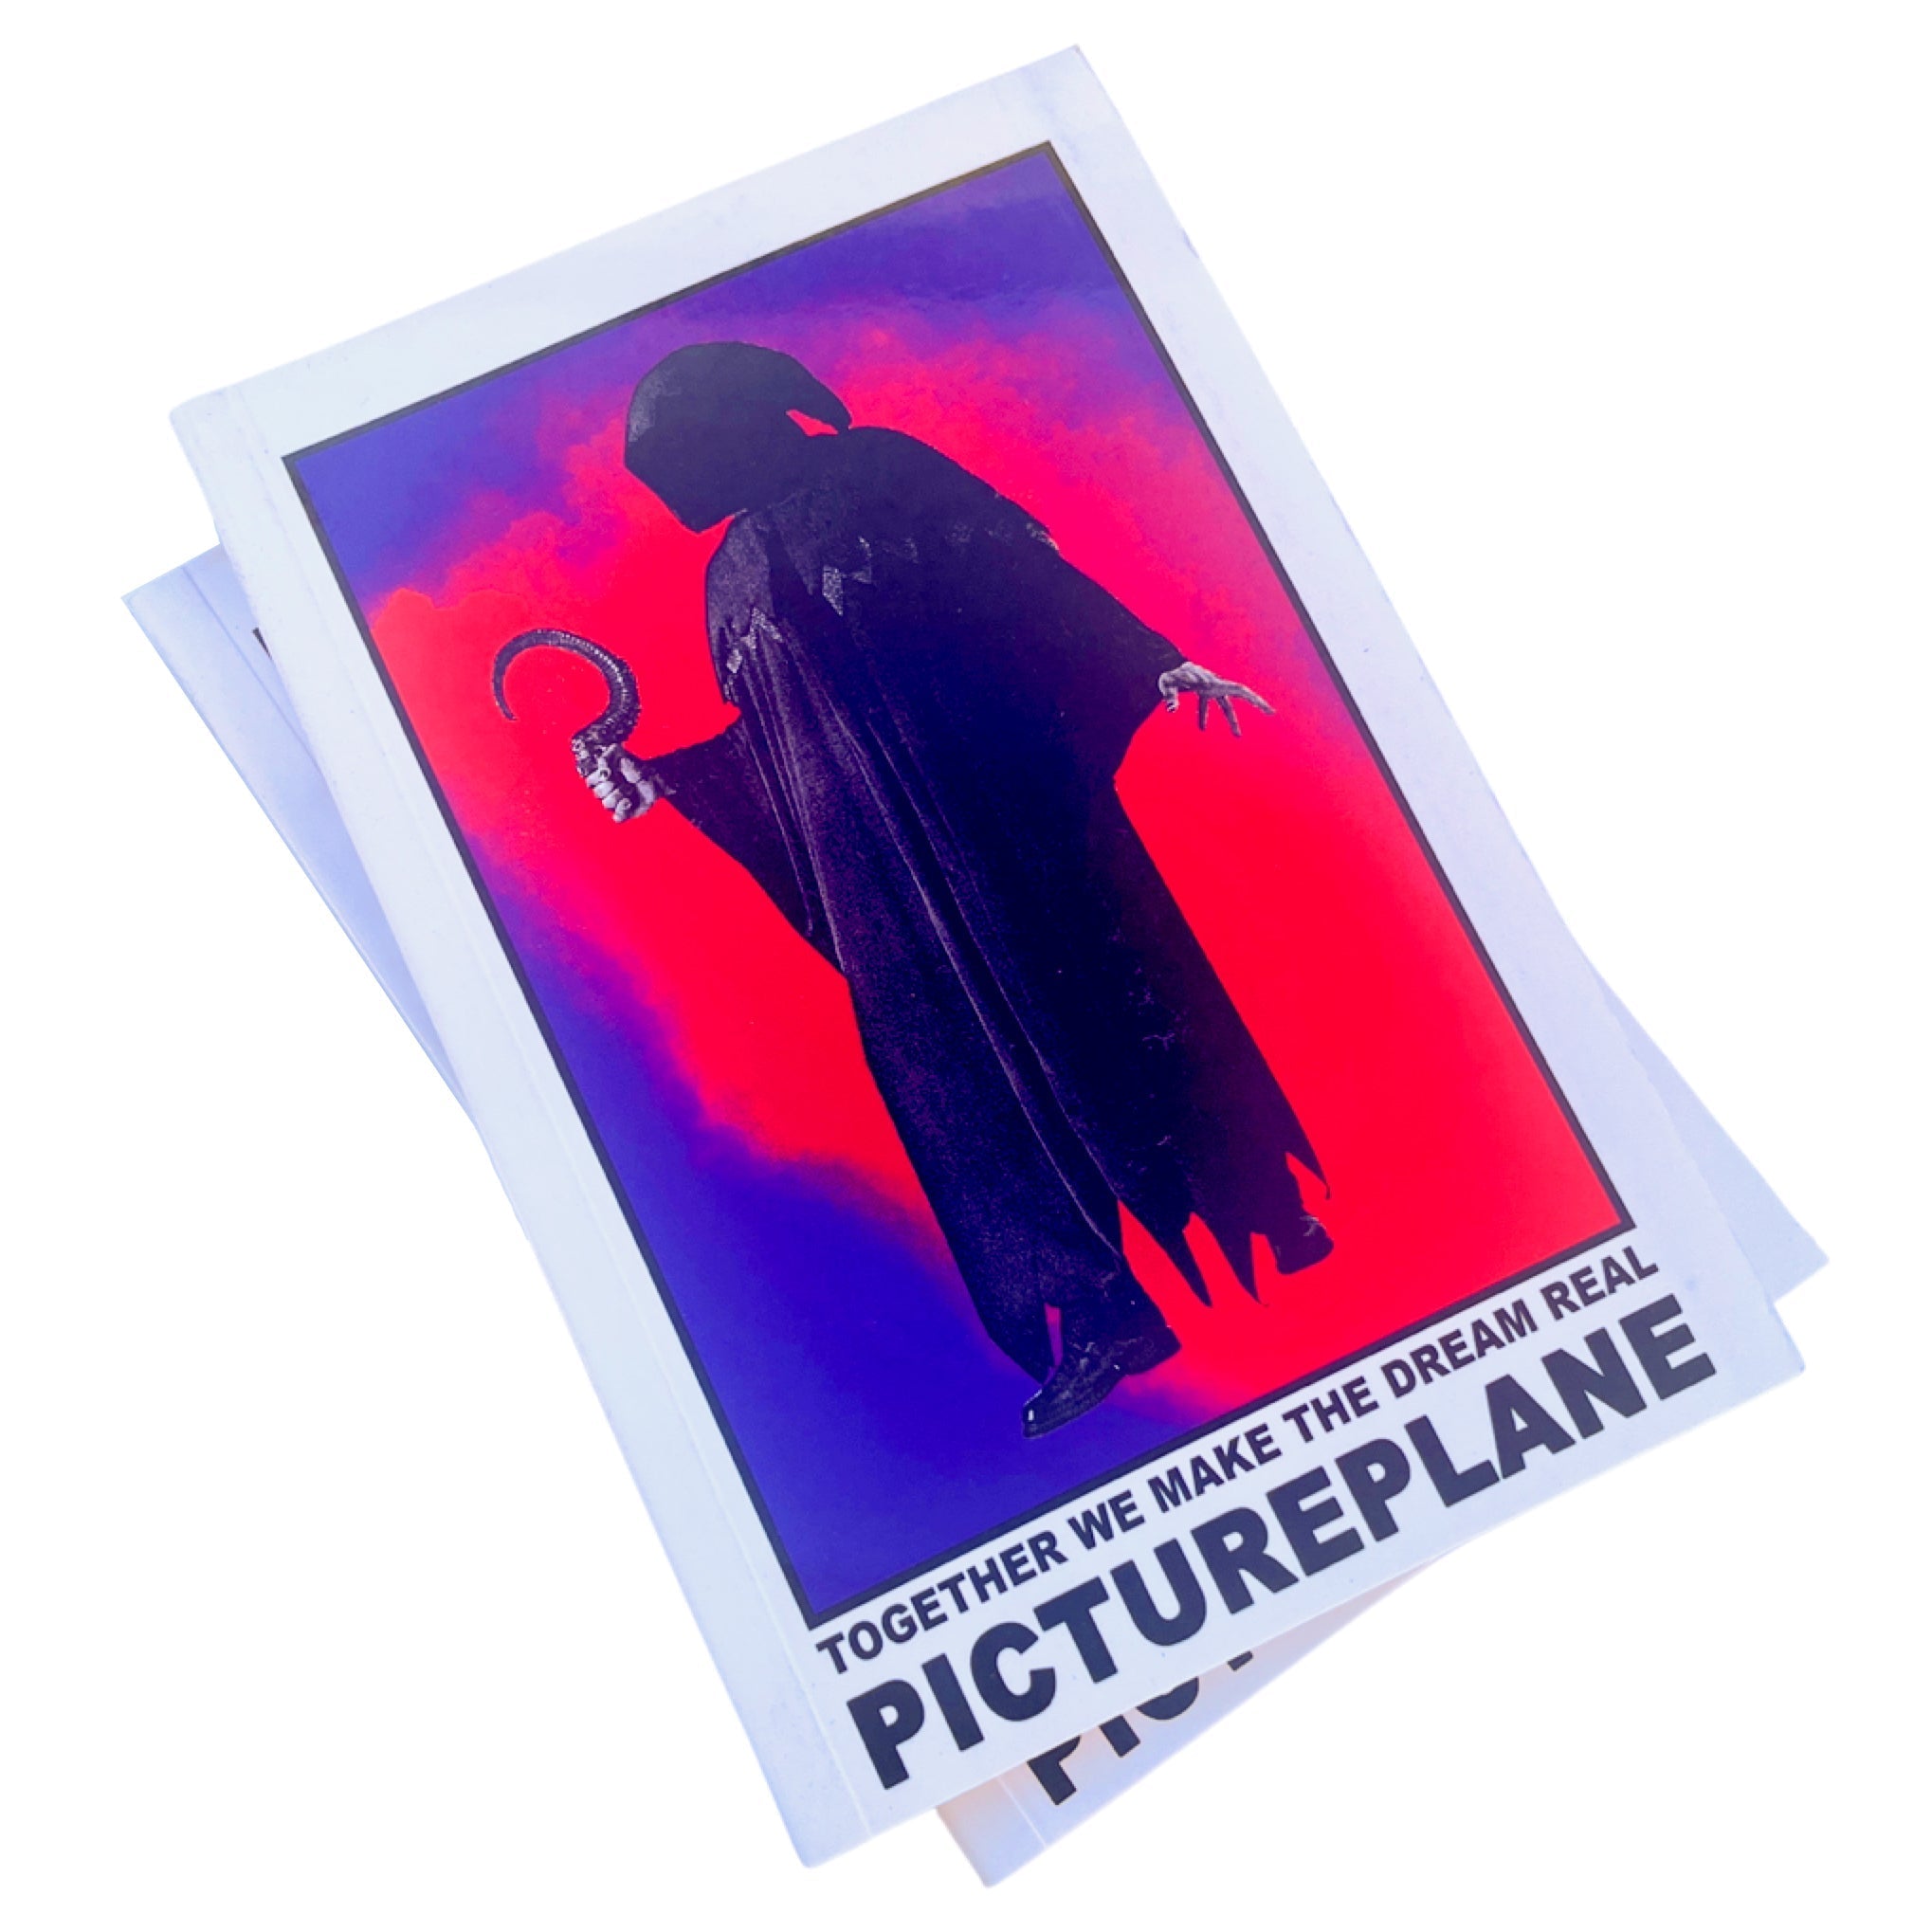 PICTUREPLANE - "Together We Make The Dream Real" Book - 100% Electronica Official Store (Photo 1)